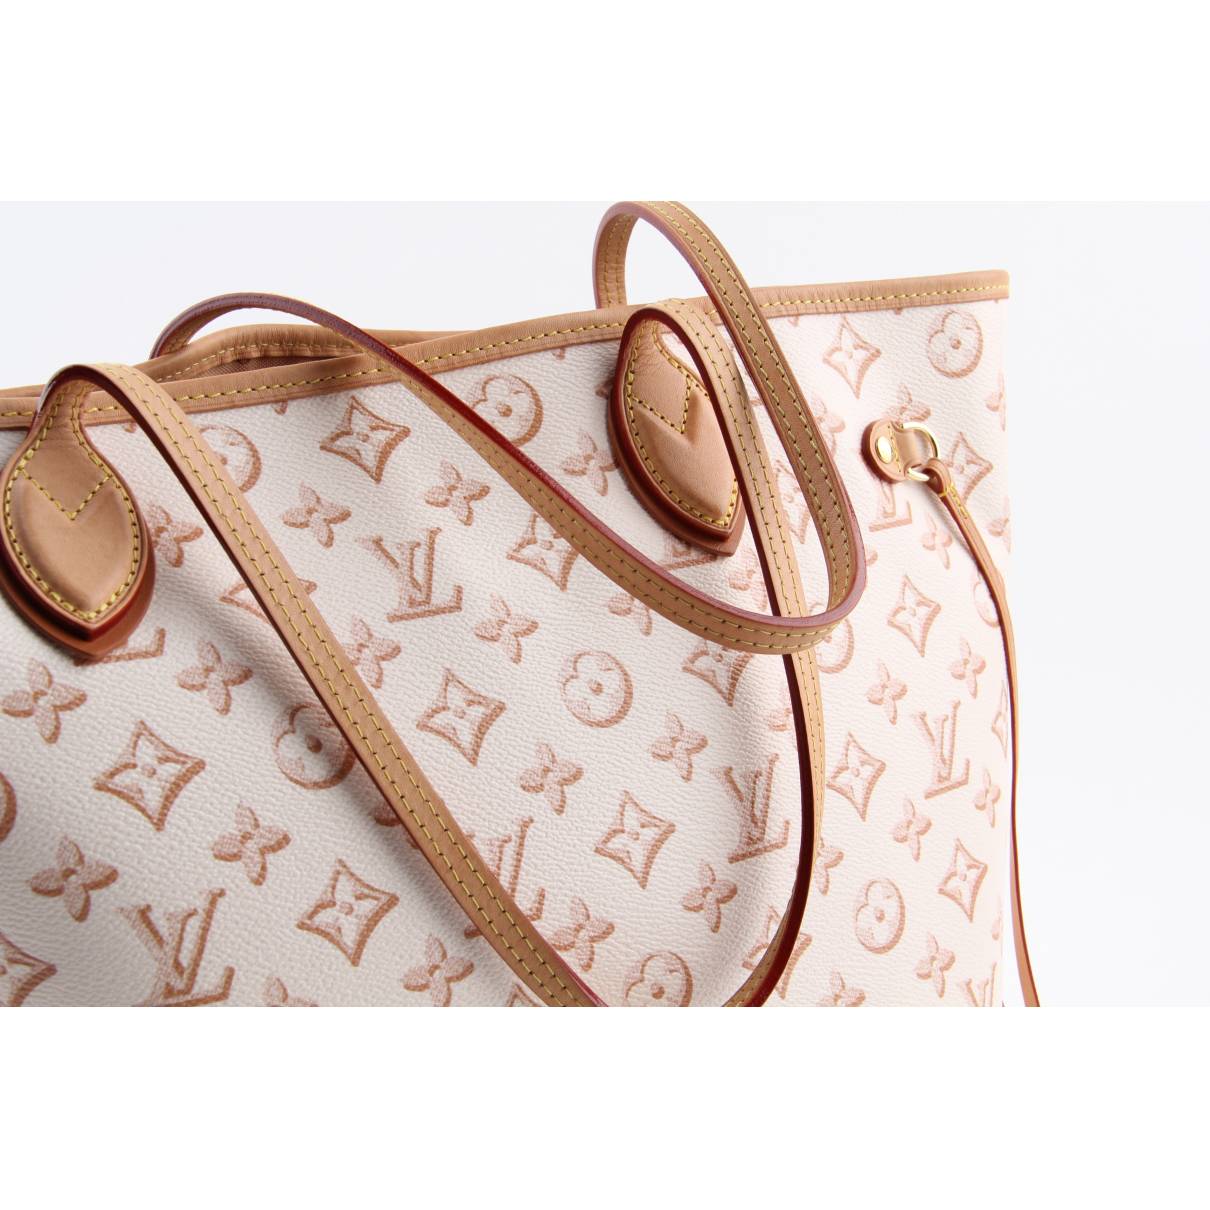 white and pink neverfull